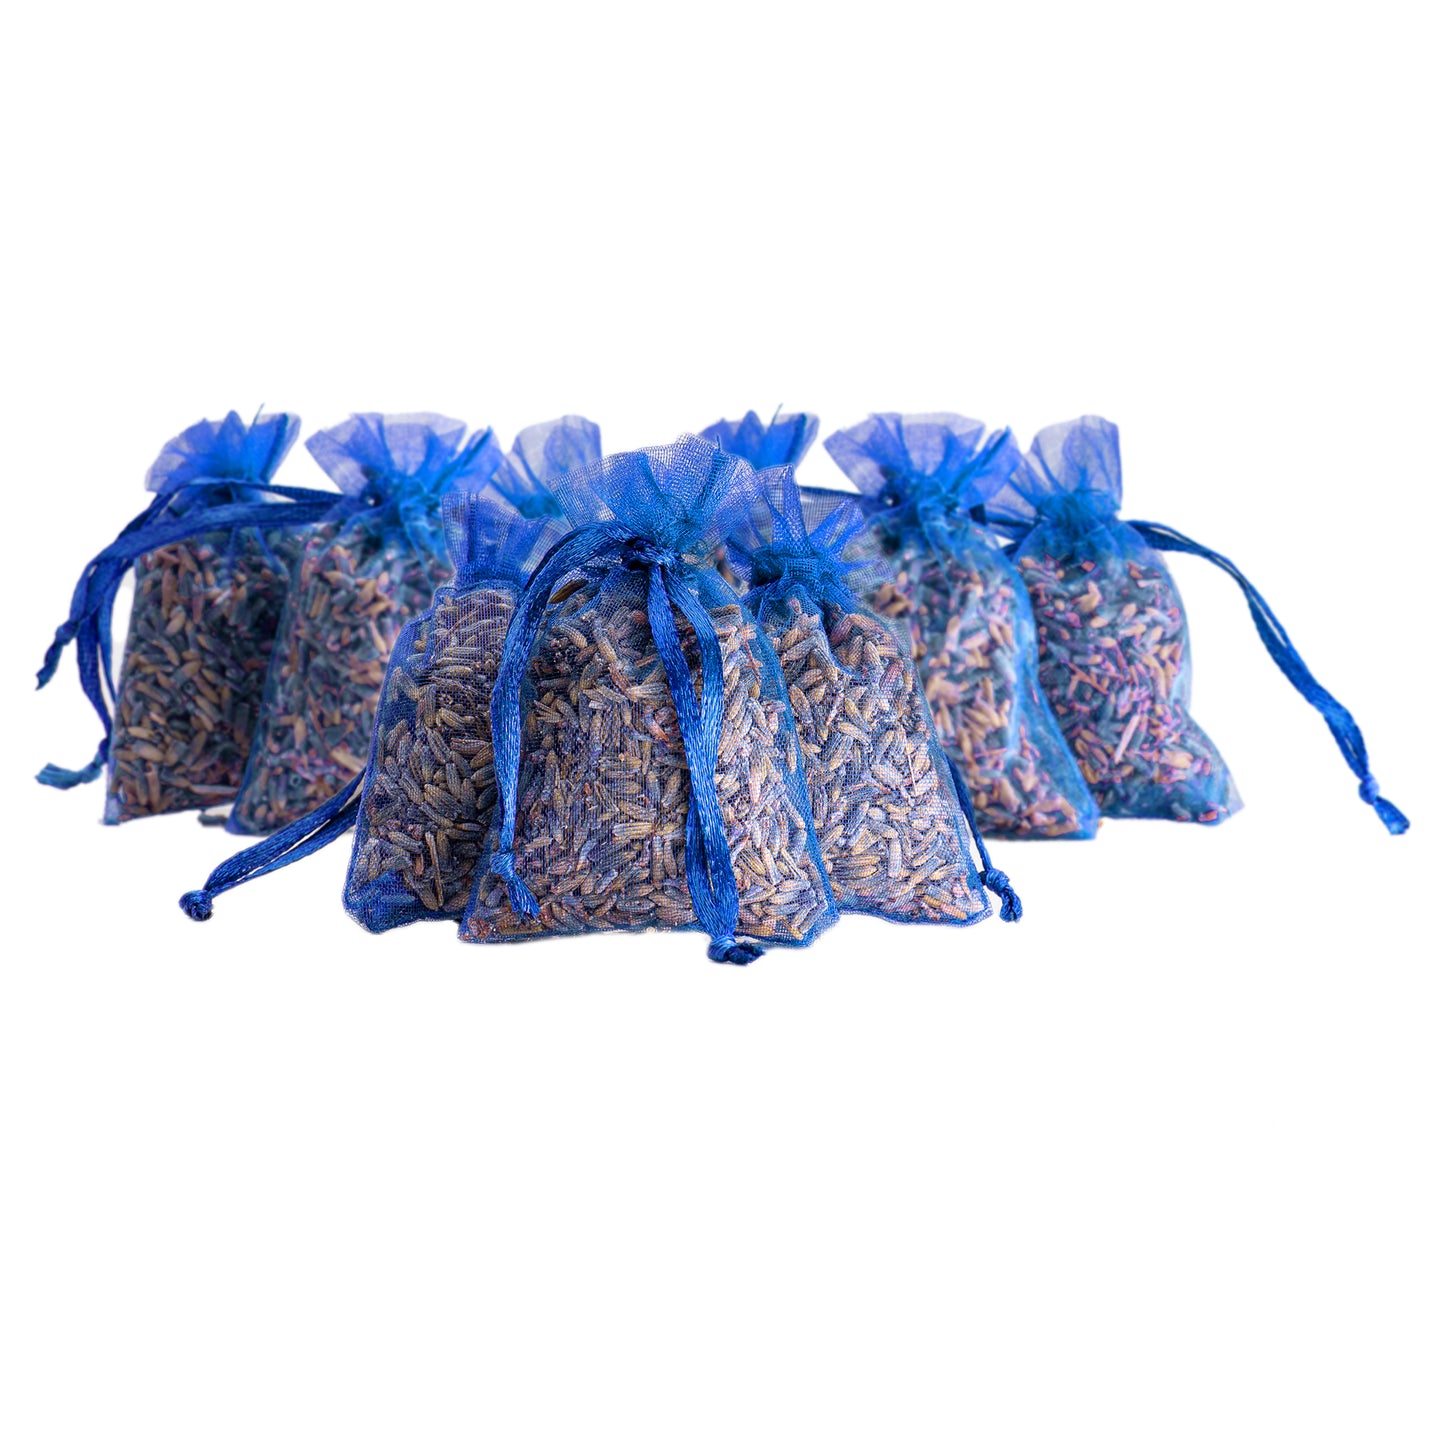 Lavender scented sachets, lilac 10 x 3 grams. NOW €3.50 DISCOUNT at checkout!!